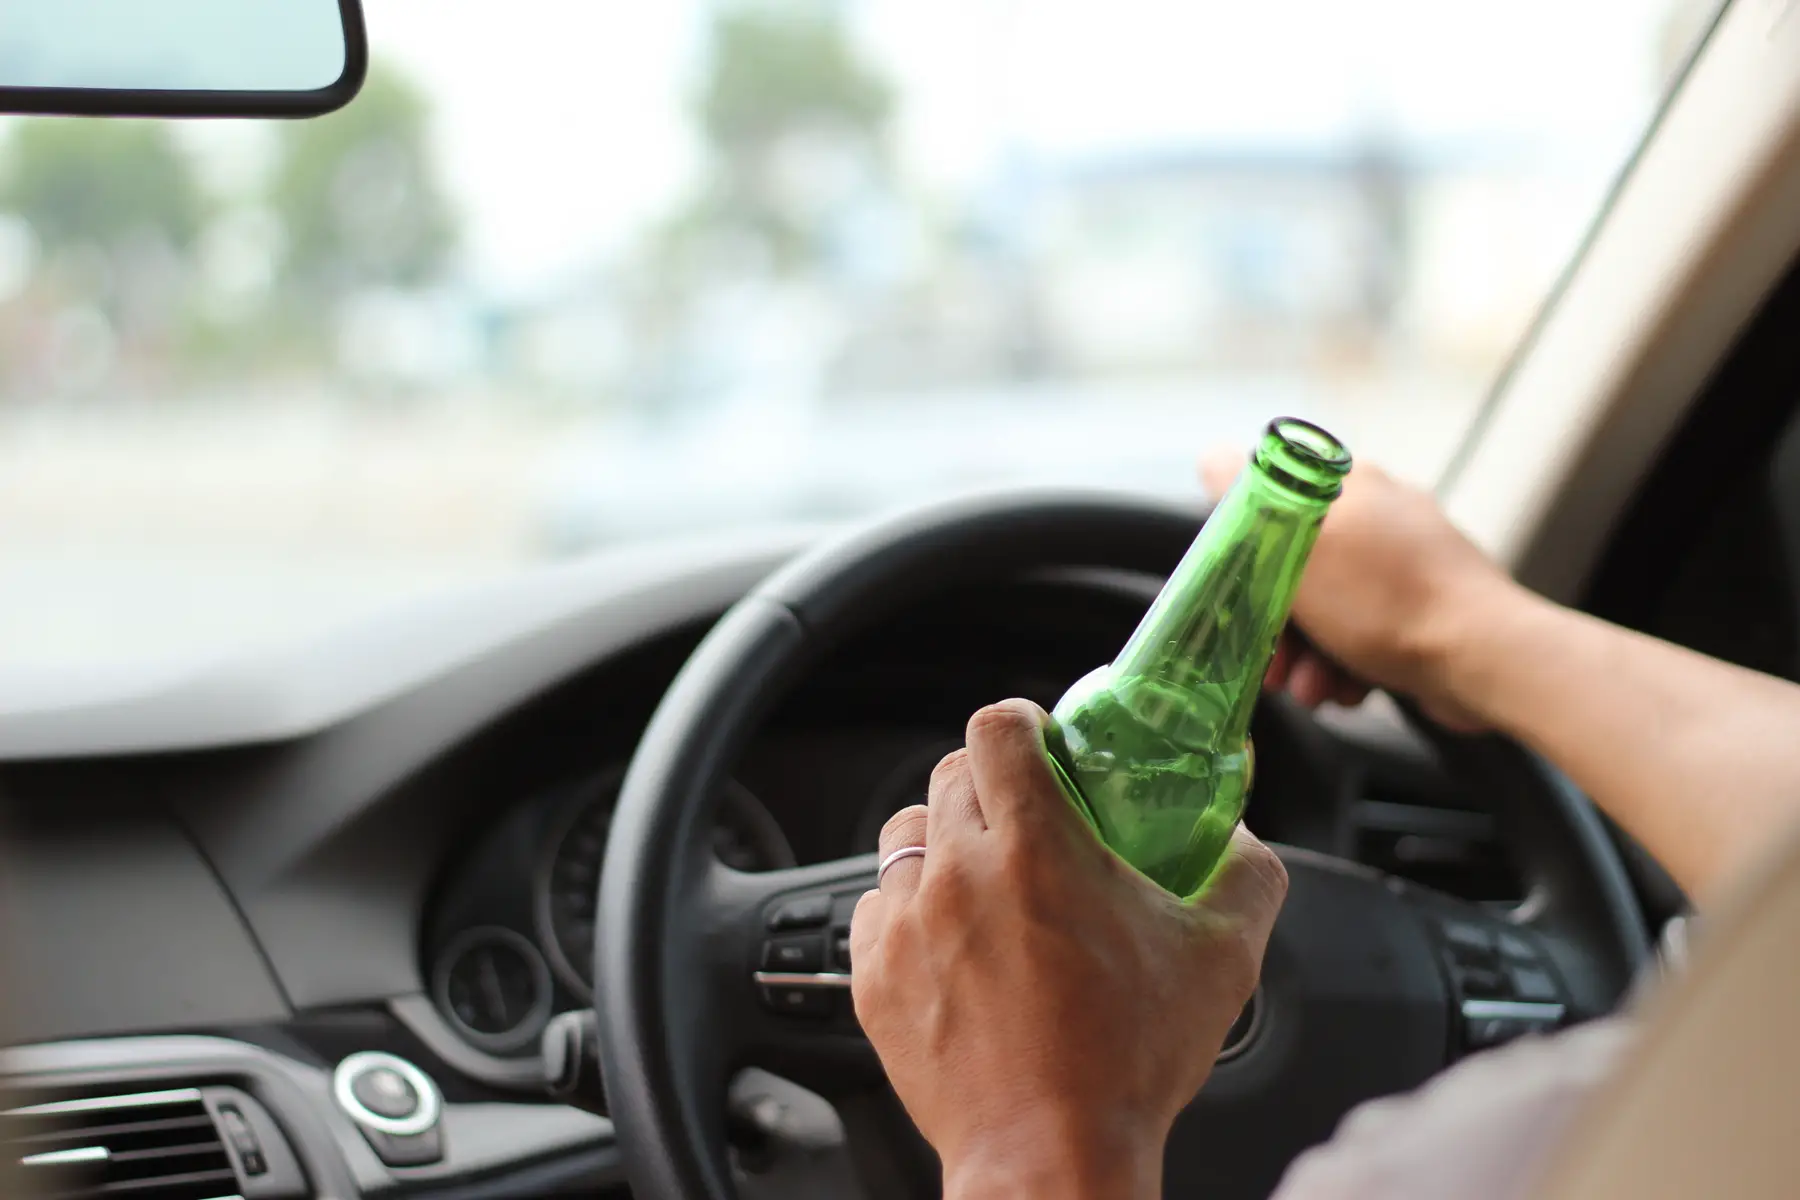 Driving while drinking alcohol